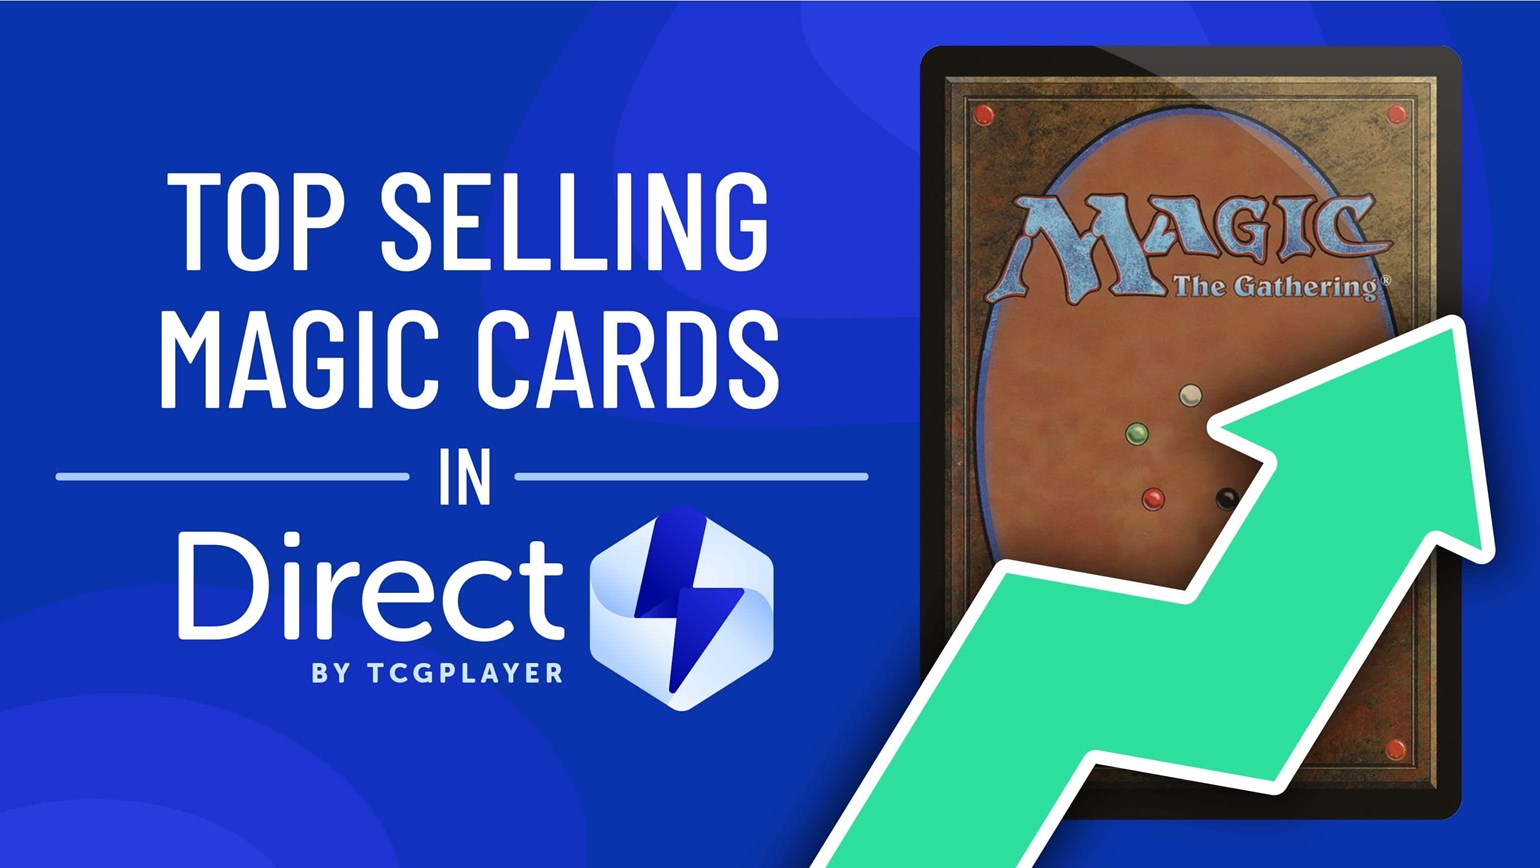 February Top Selling Magic: The Gathering Cards in Direct by TCGplayer